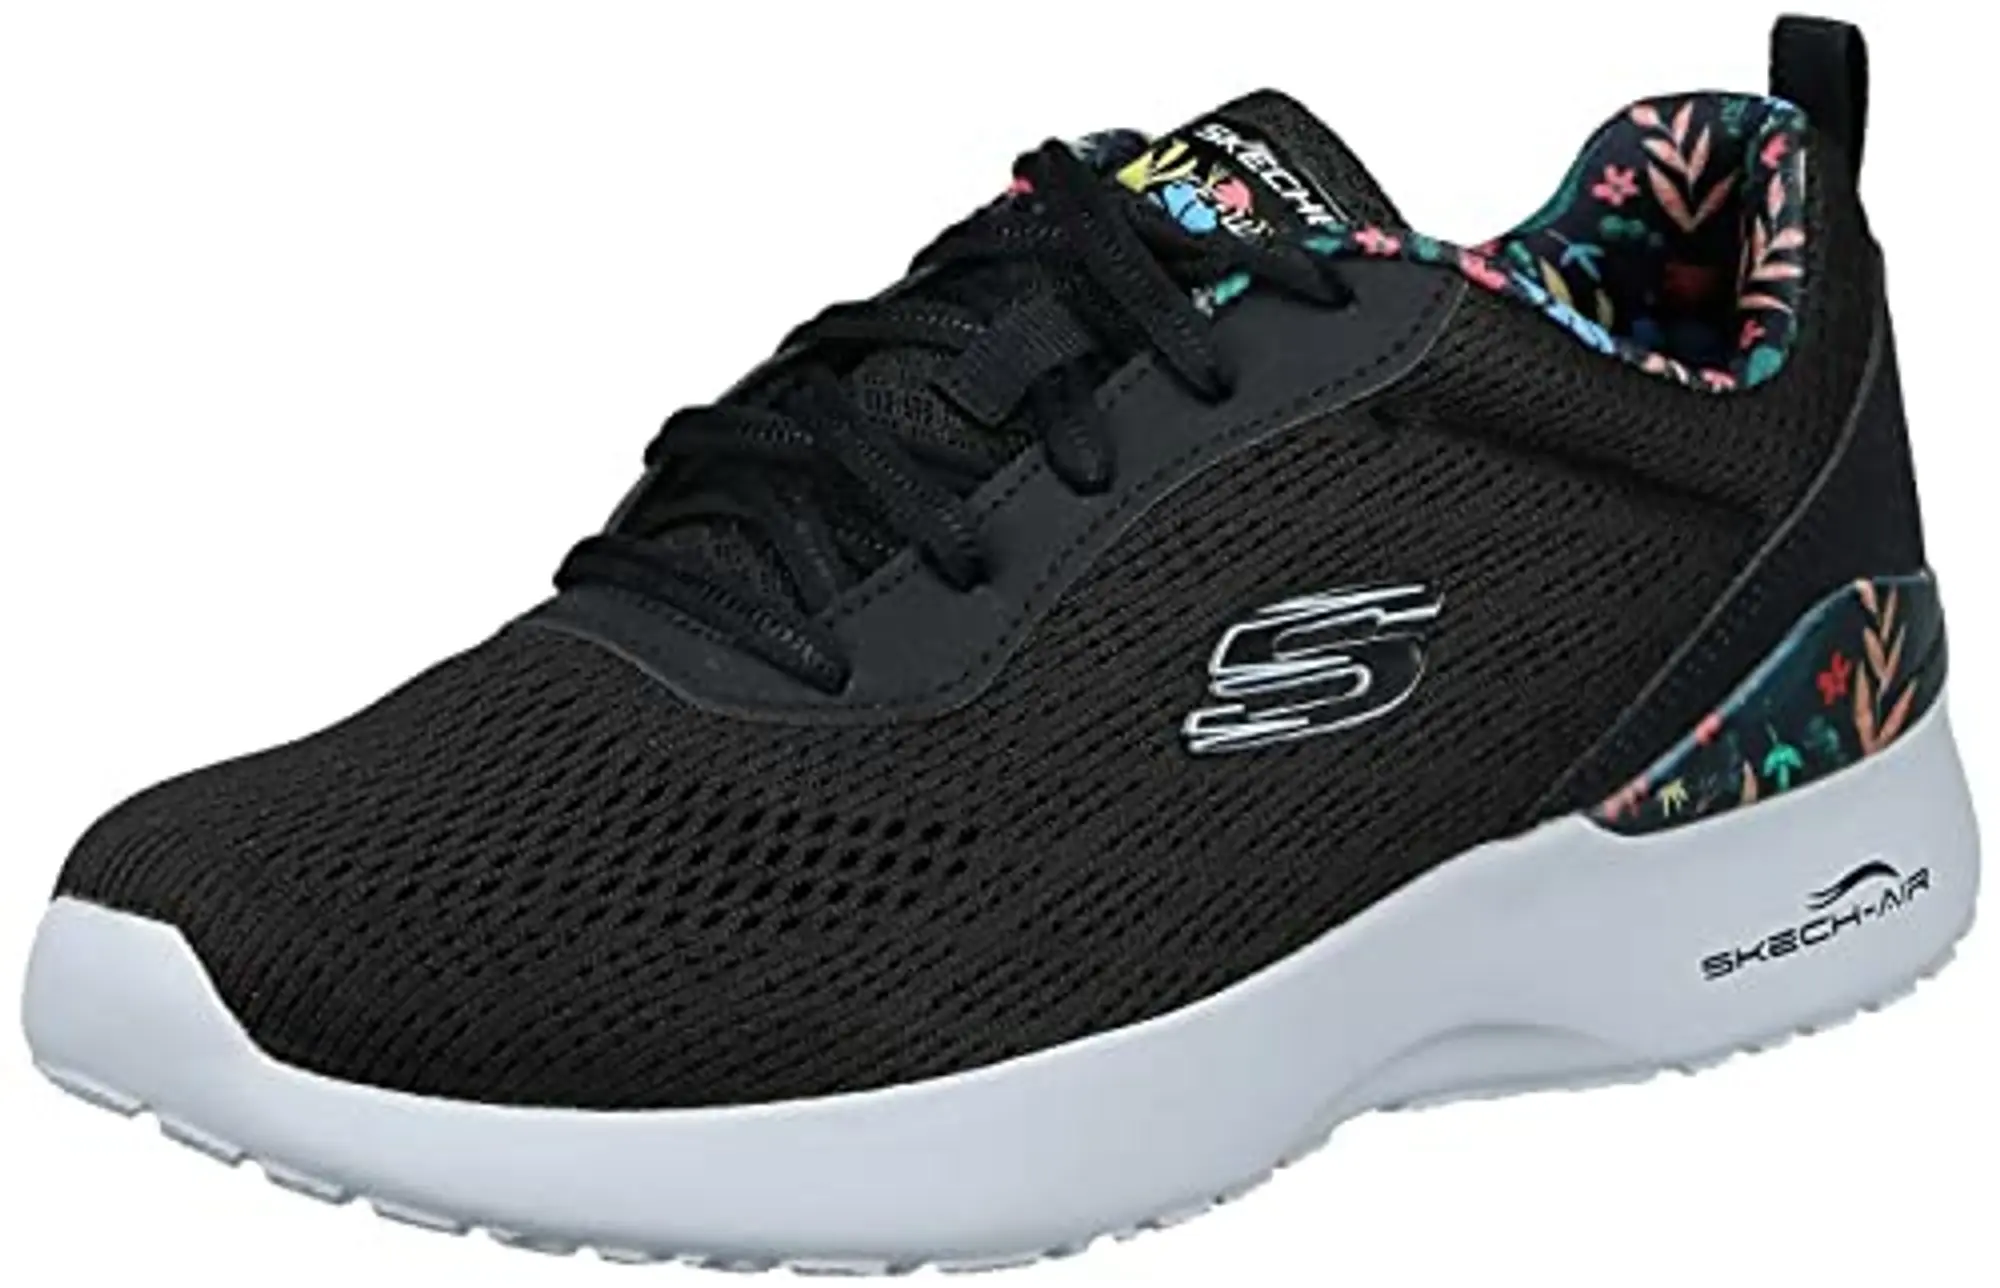 Skechers Womens Skech-Air Dynamight Laid Out Trainers (Black) Colour: Black,